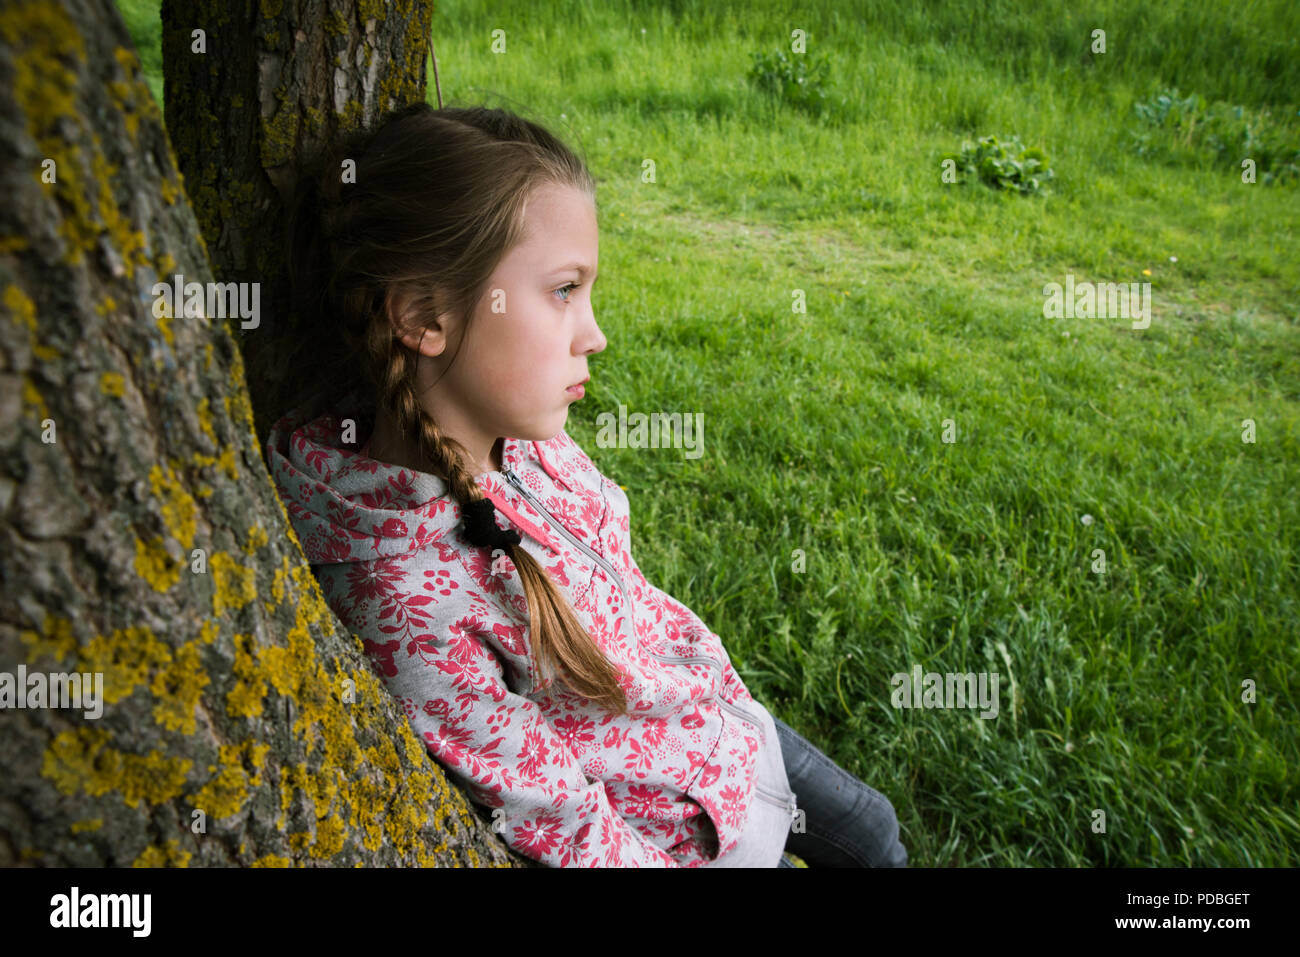 child girl leaning on tree trunk in pensive mood outdoors Stock Photo